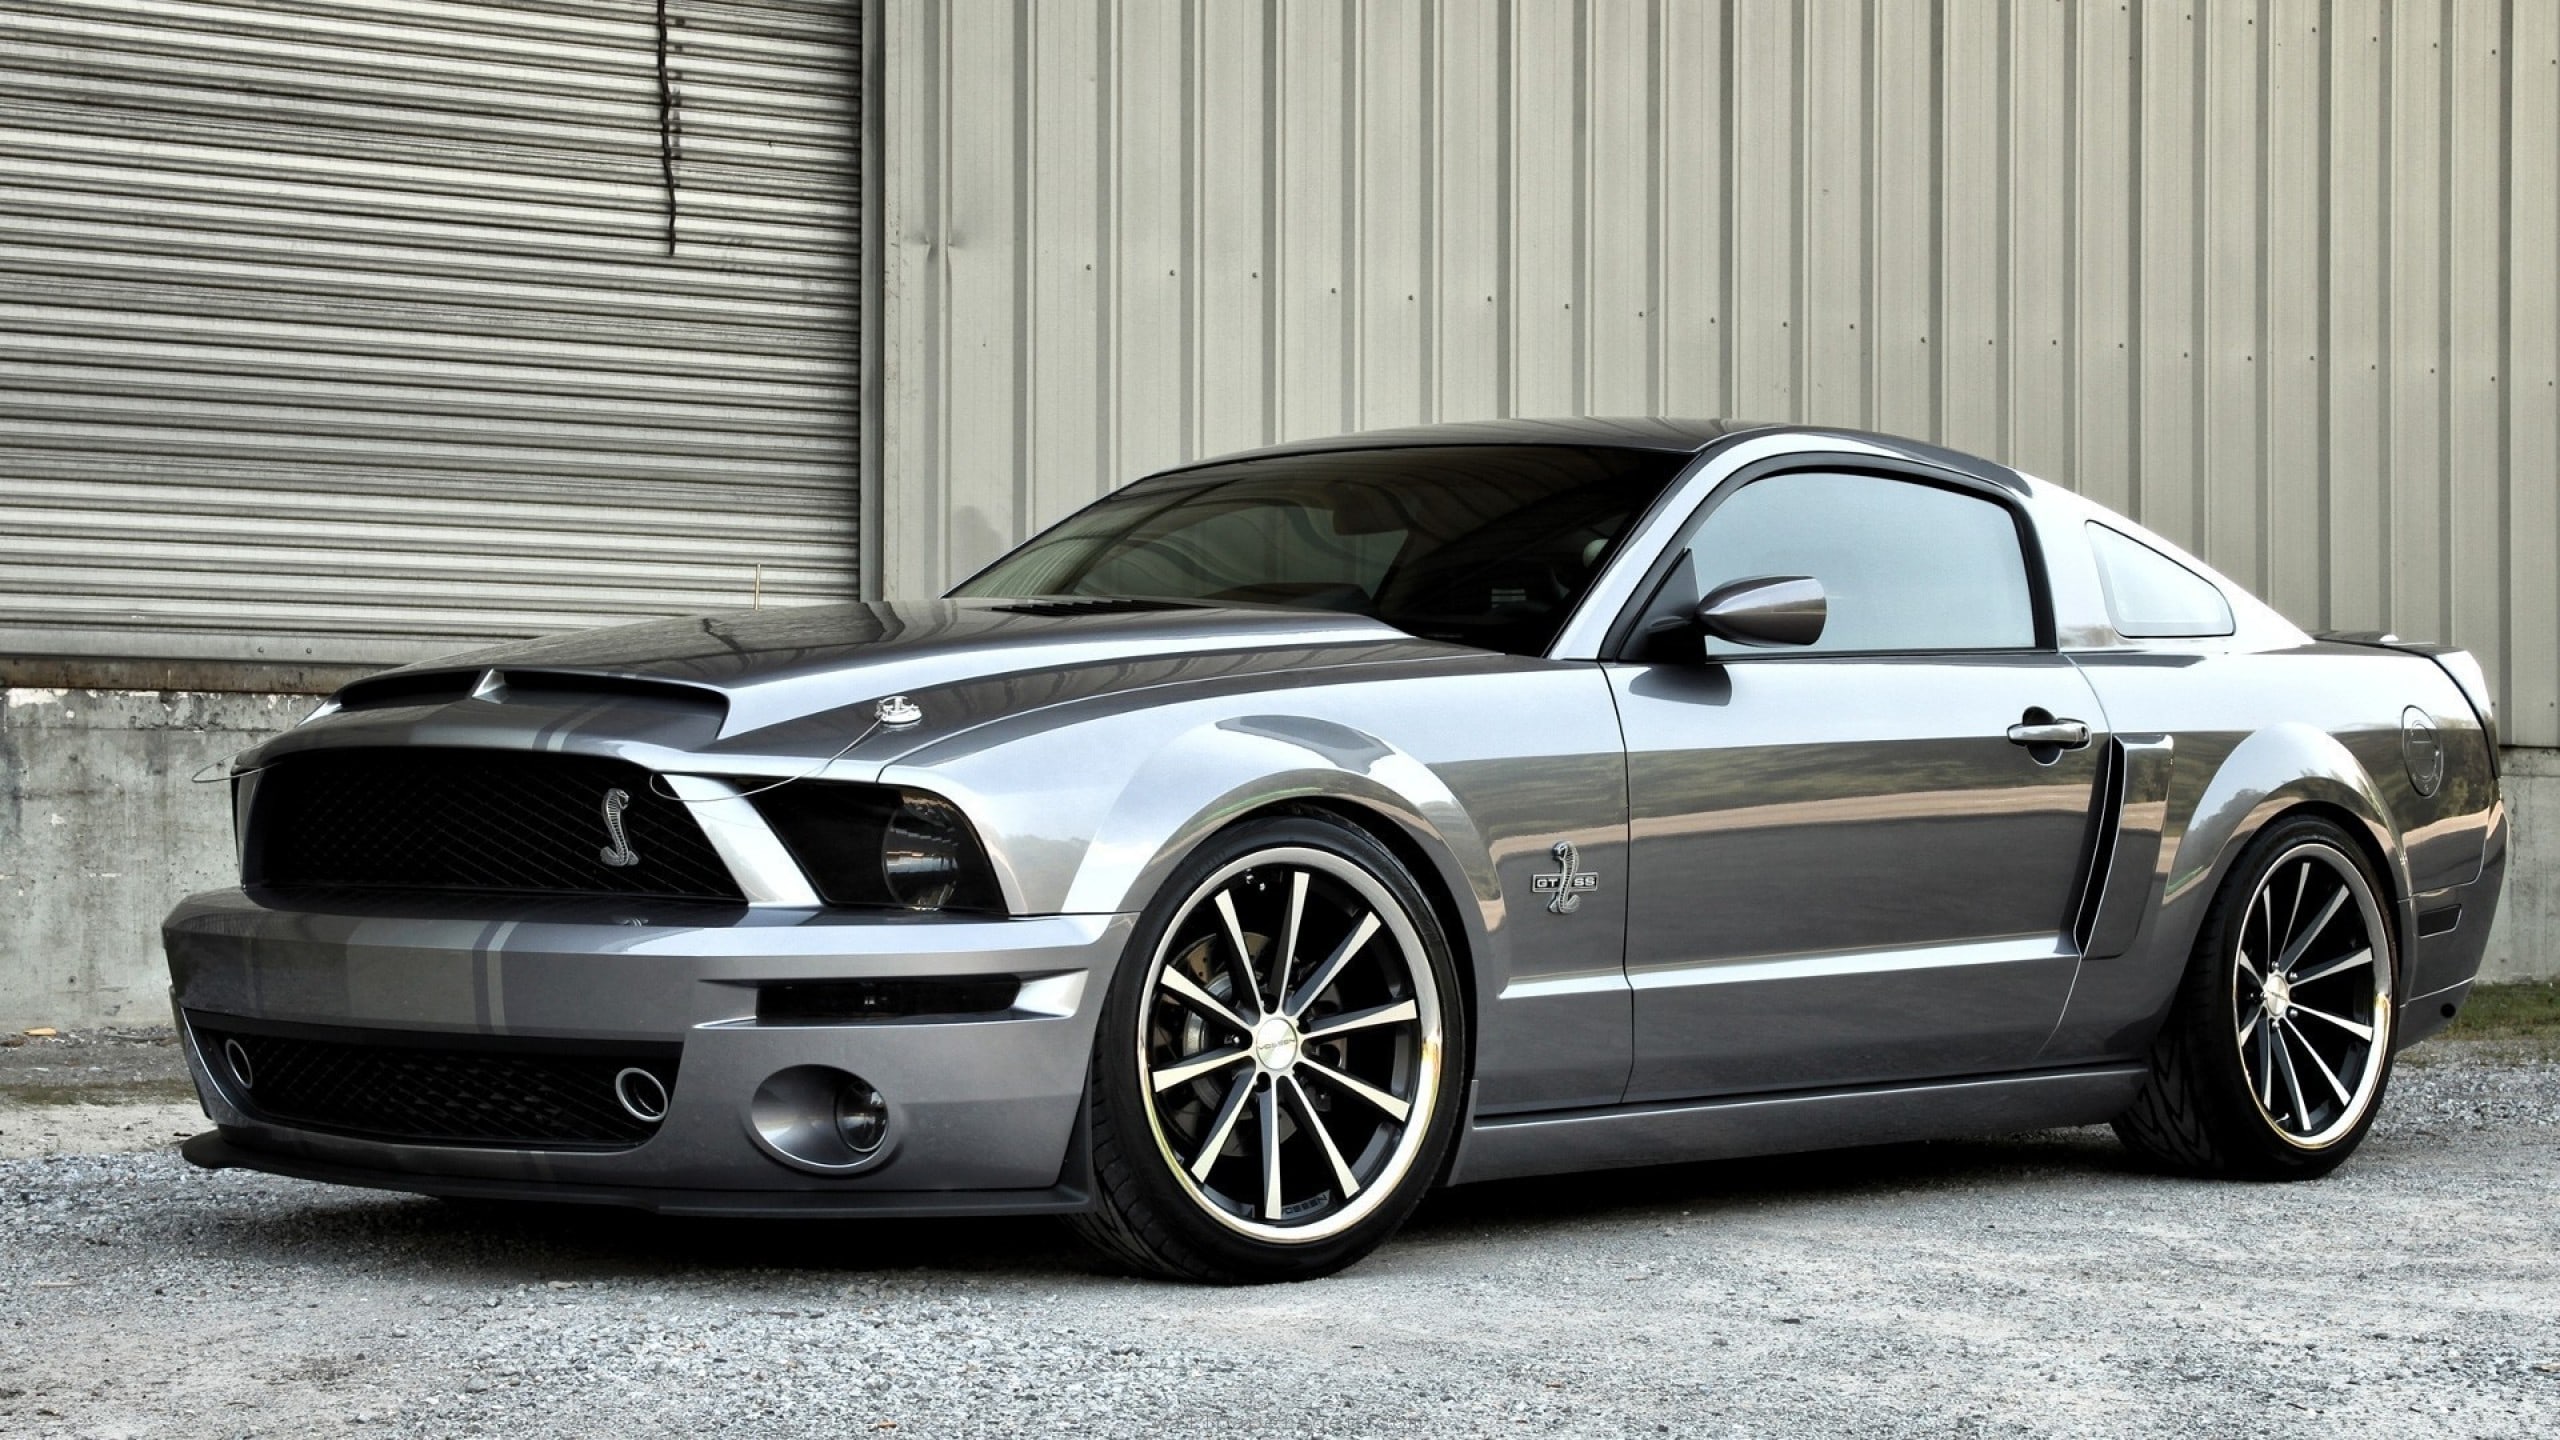 Ford Mustang Gt Hd Wallpapers 7wallpapers Net